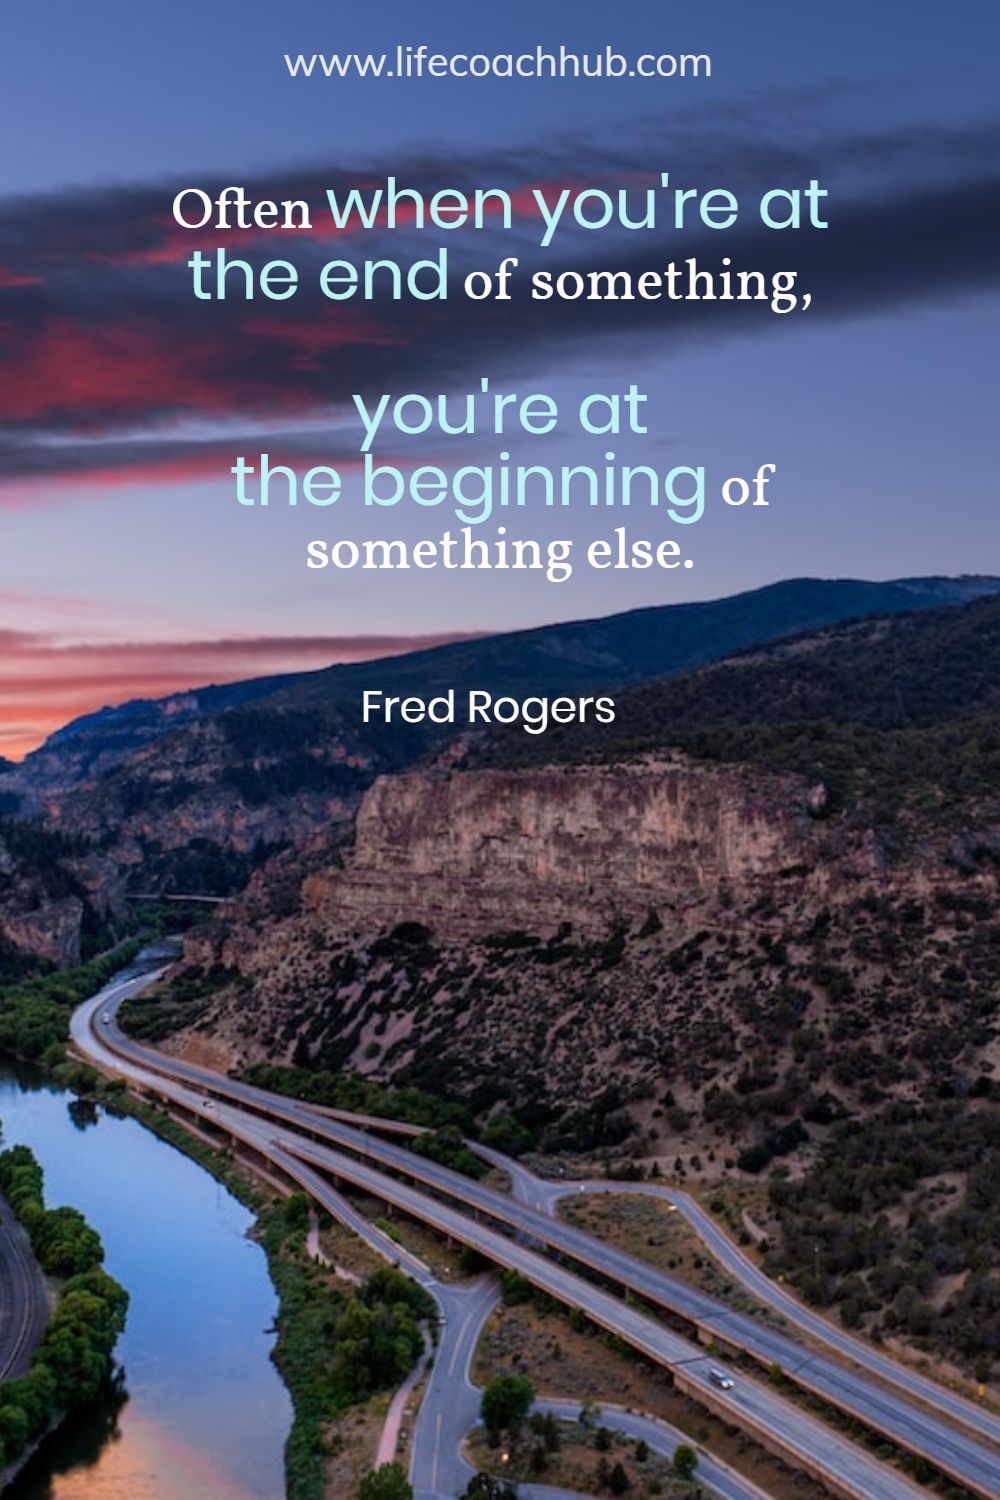 Often when you're at the end of something, you're at the beginning of something else. Fred Rogers Coaching Quote